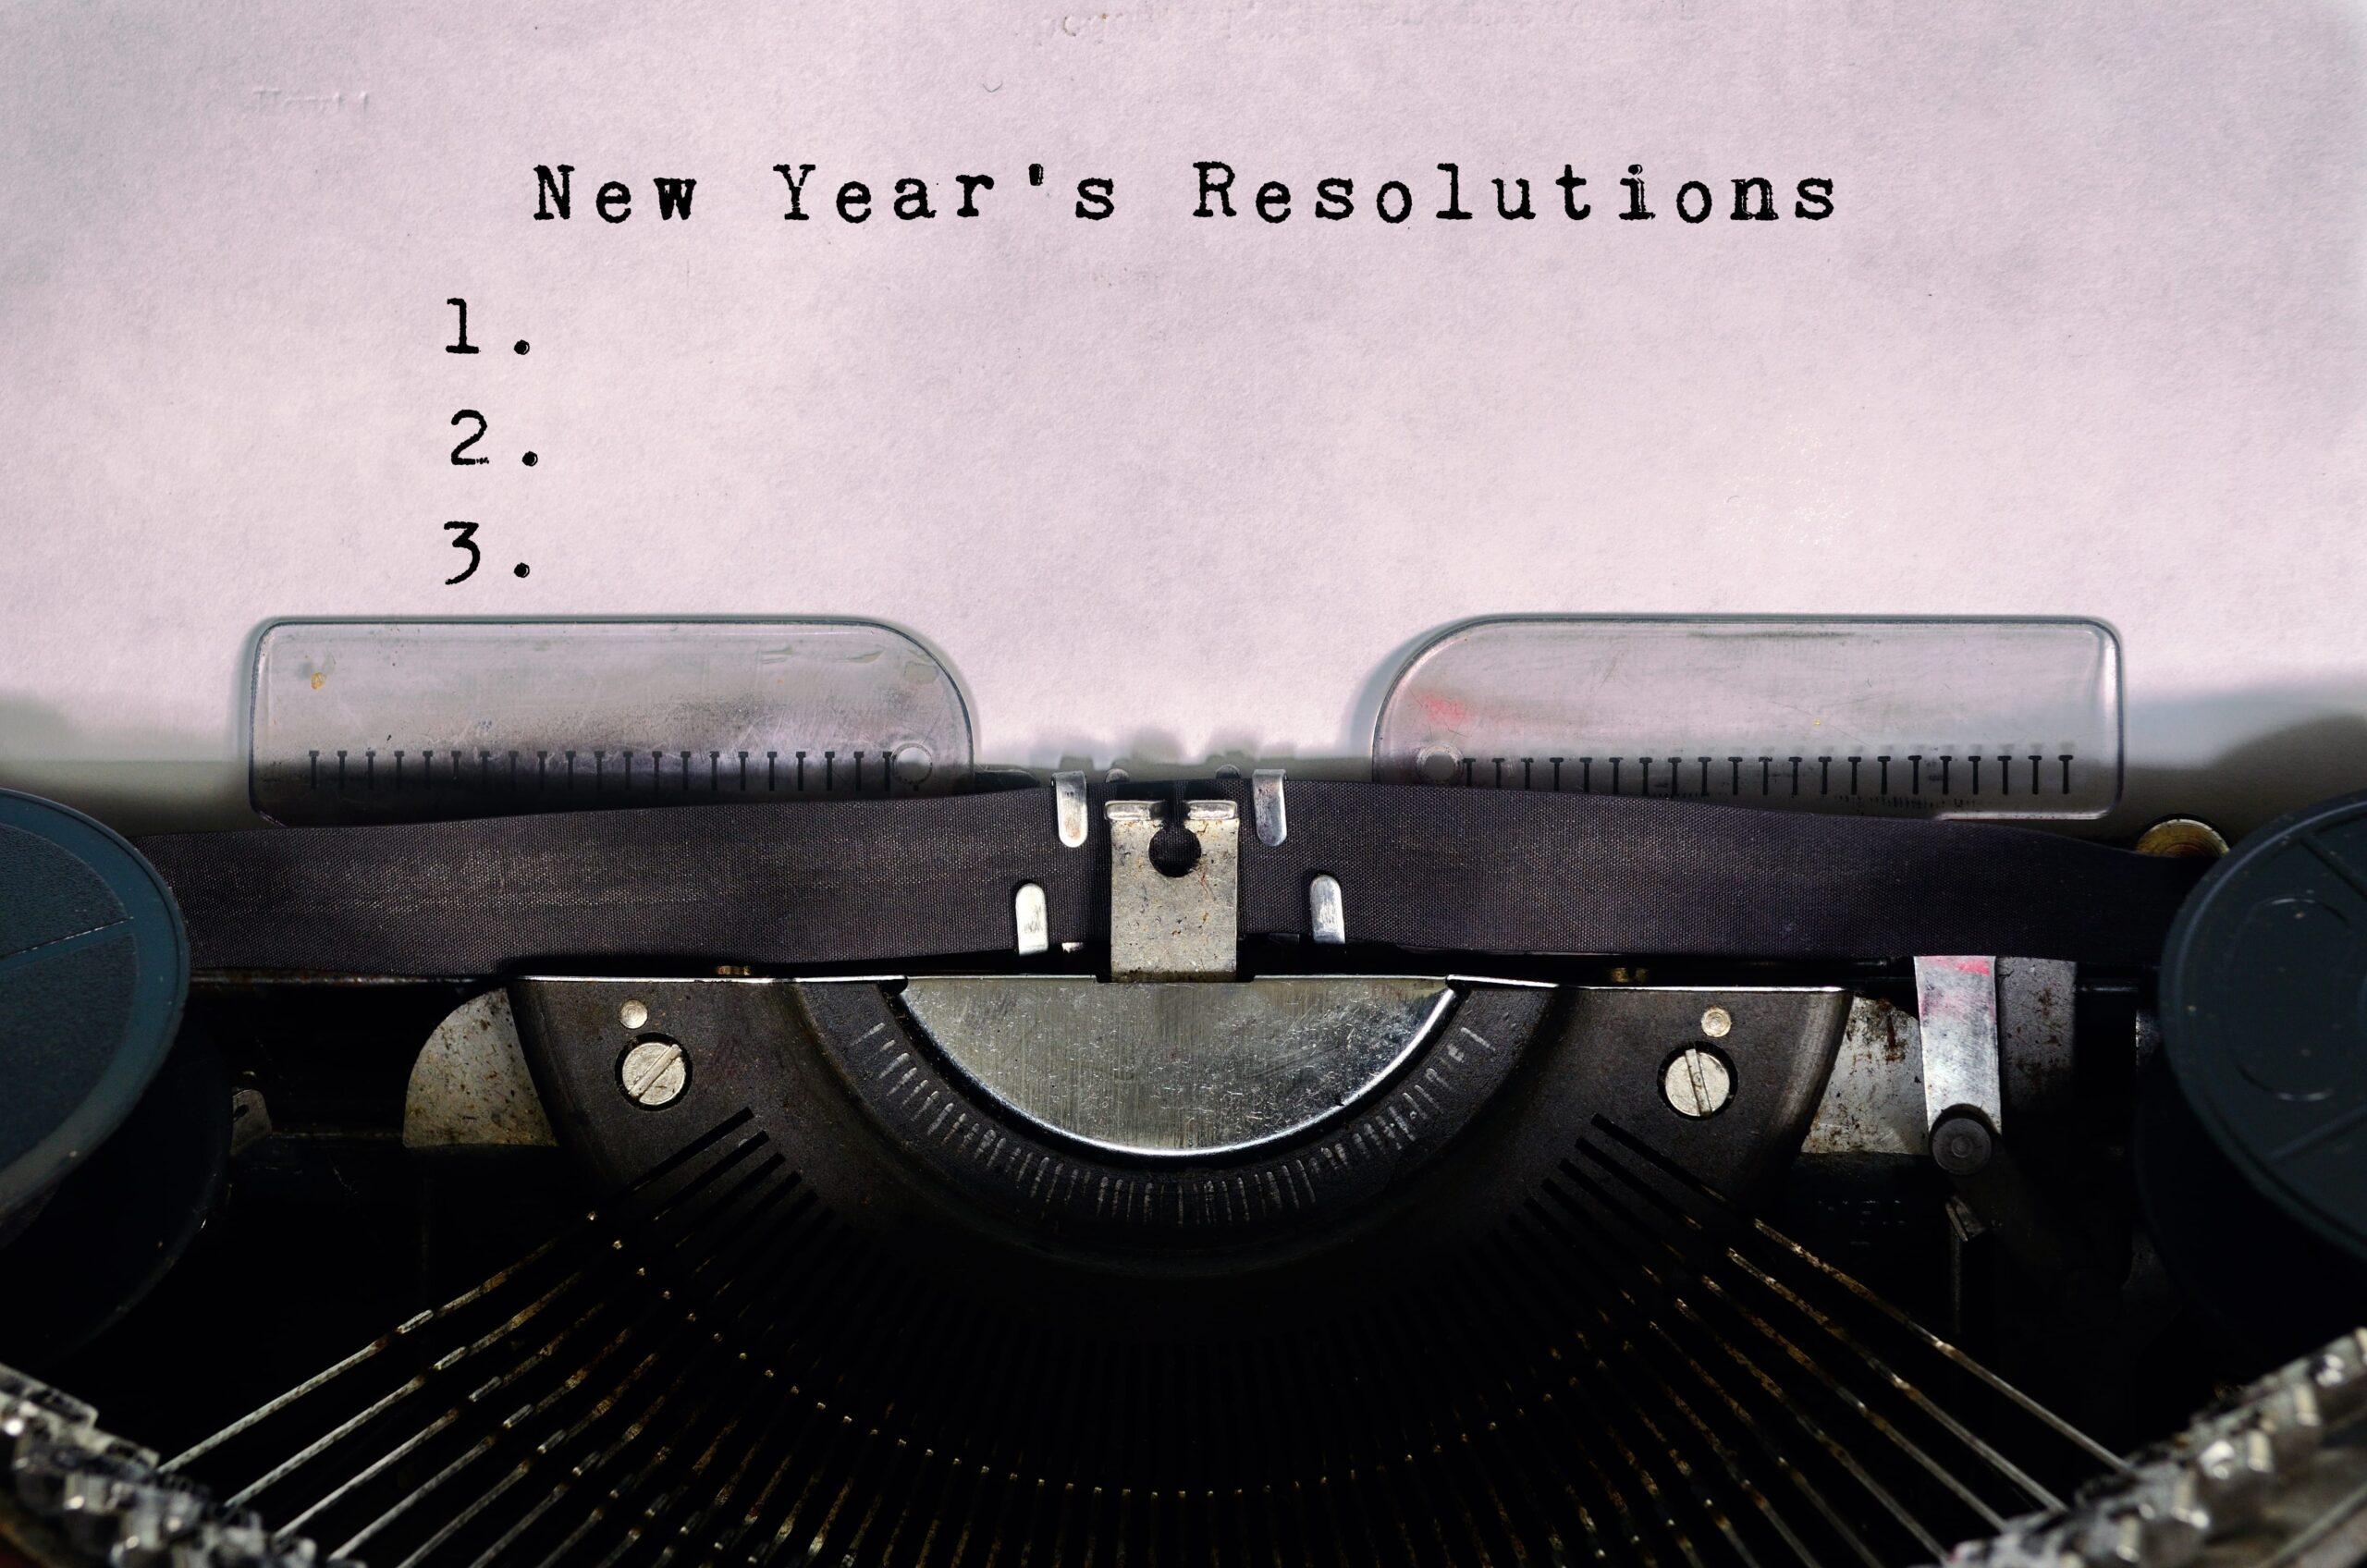 New Year’s Resolutions Typed on a Vintage Typewriter